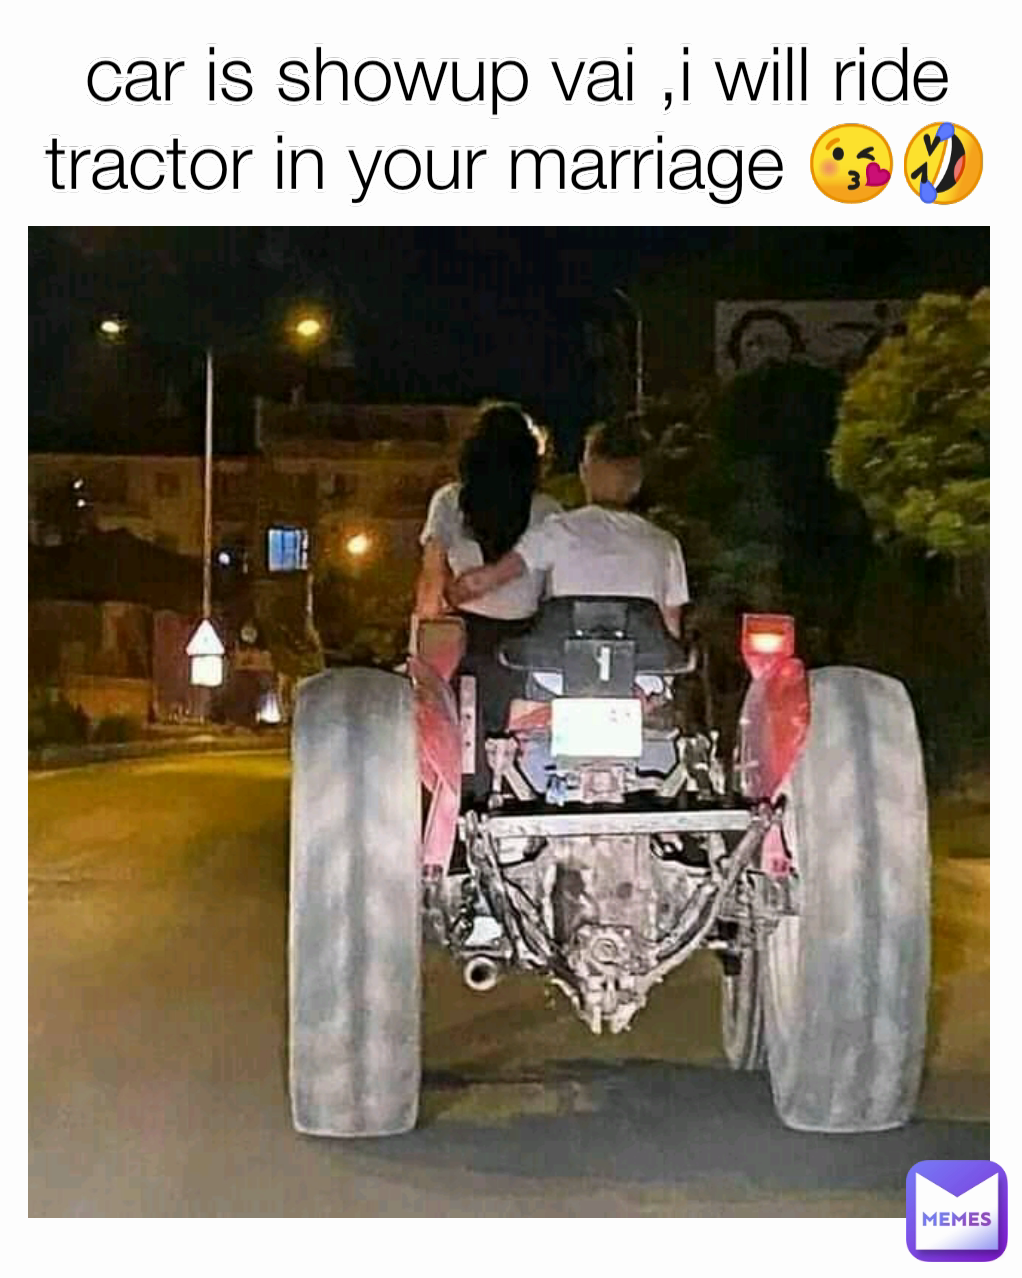 car is showup vai ,i will ride tractor in your marriage 😘🤣